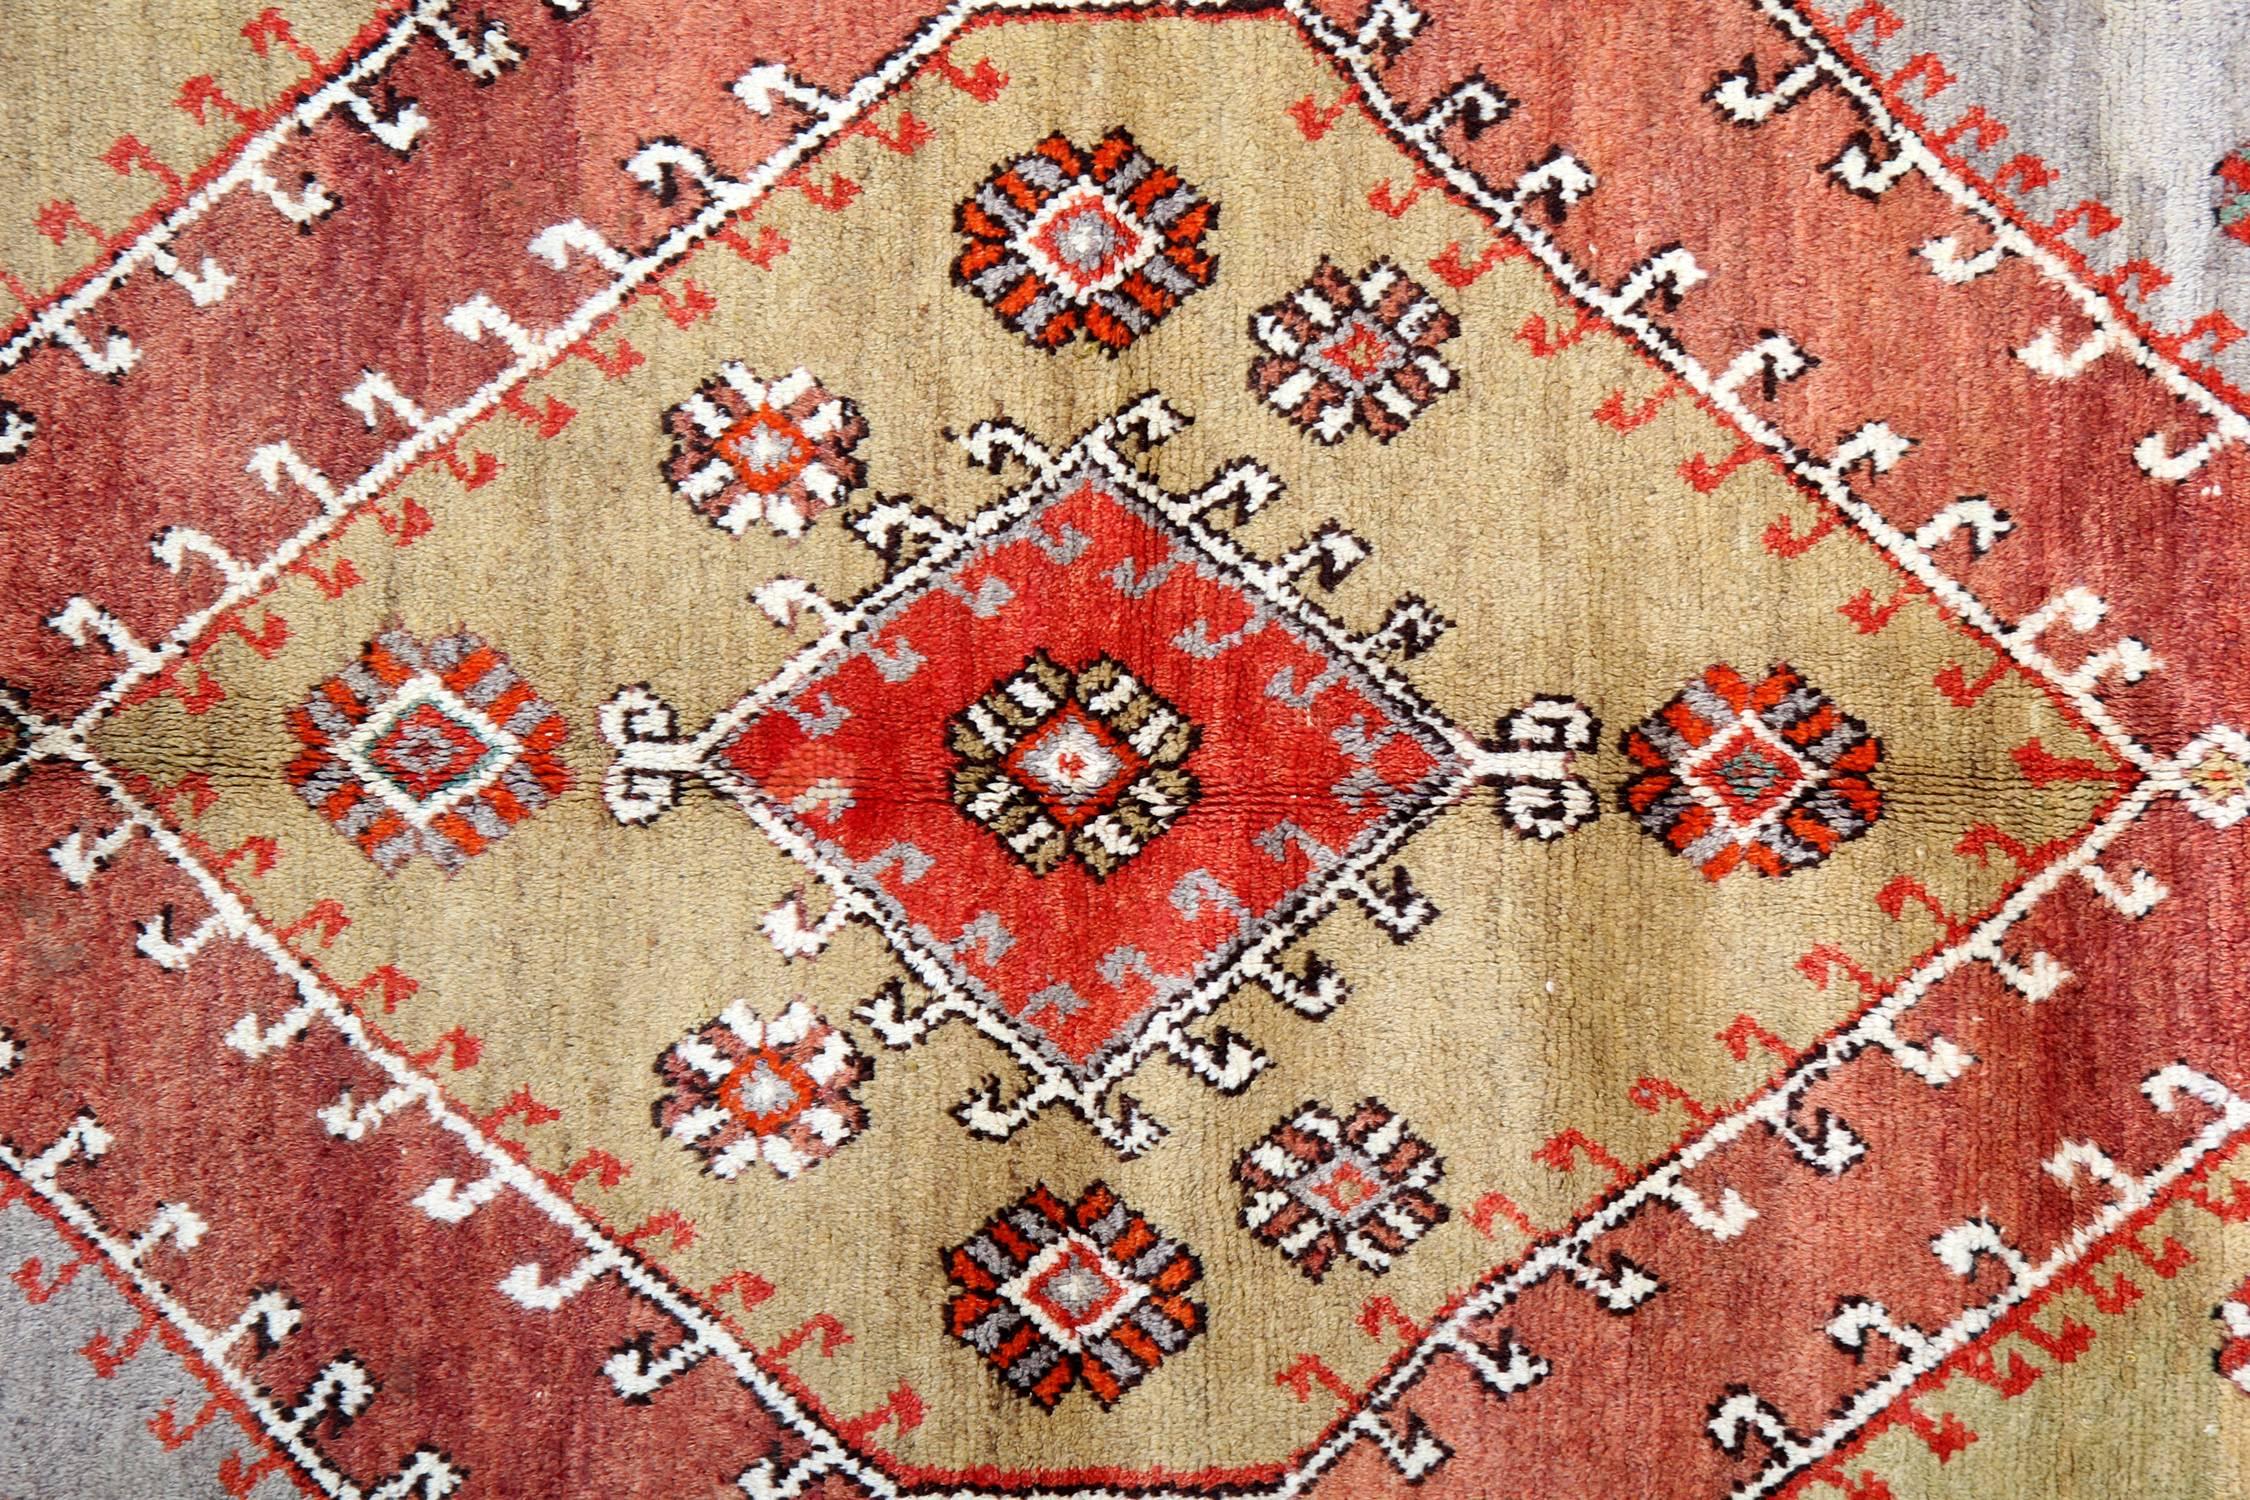 Hand-Crafted Handmade Carpet Antique Rug, Turkish Rug, Wool Oriental Rug Knitted Carpet For Sale